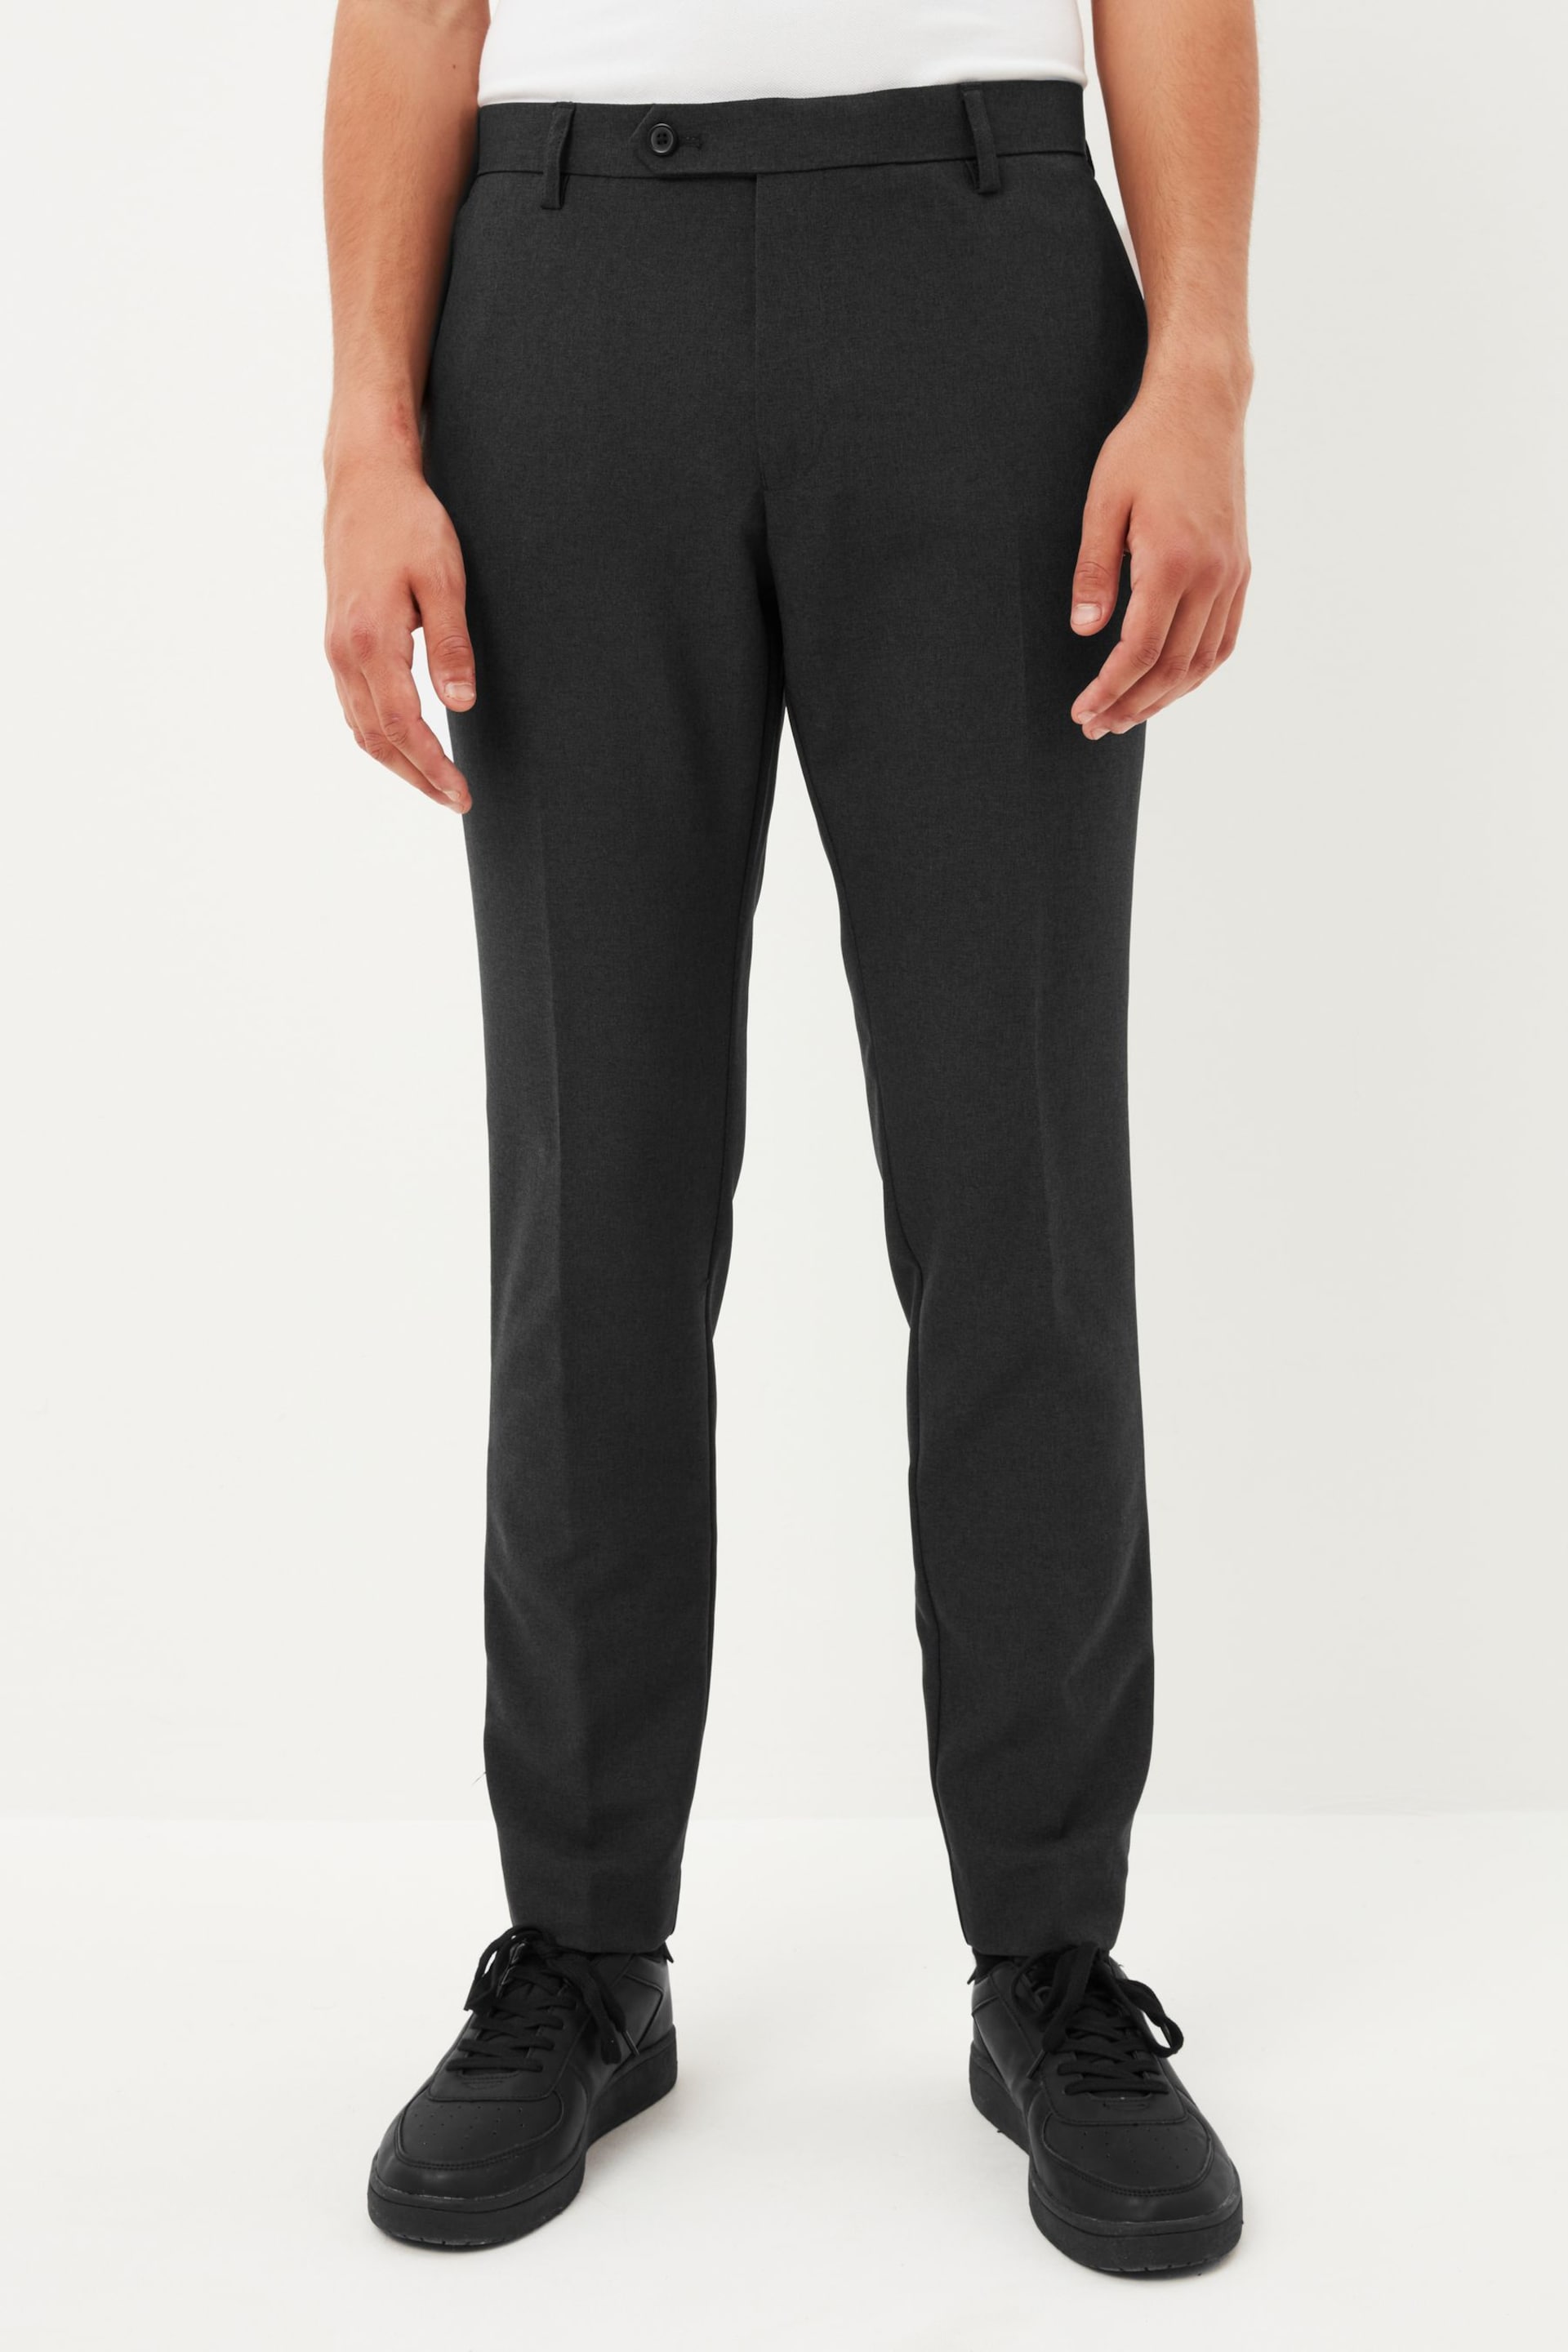 Charcoal Grey Skinny Machine Washable Plain Front Smart Trousers - Image 1 of 8